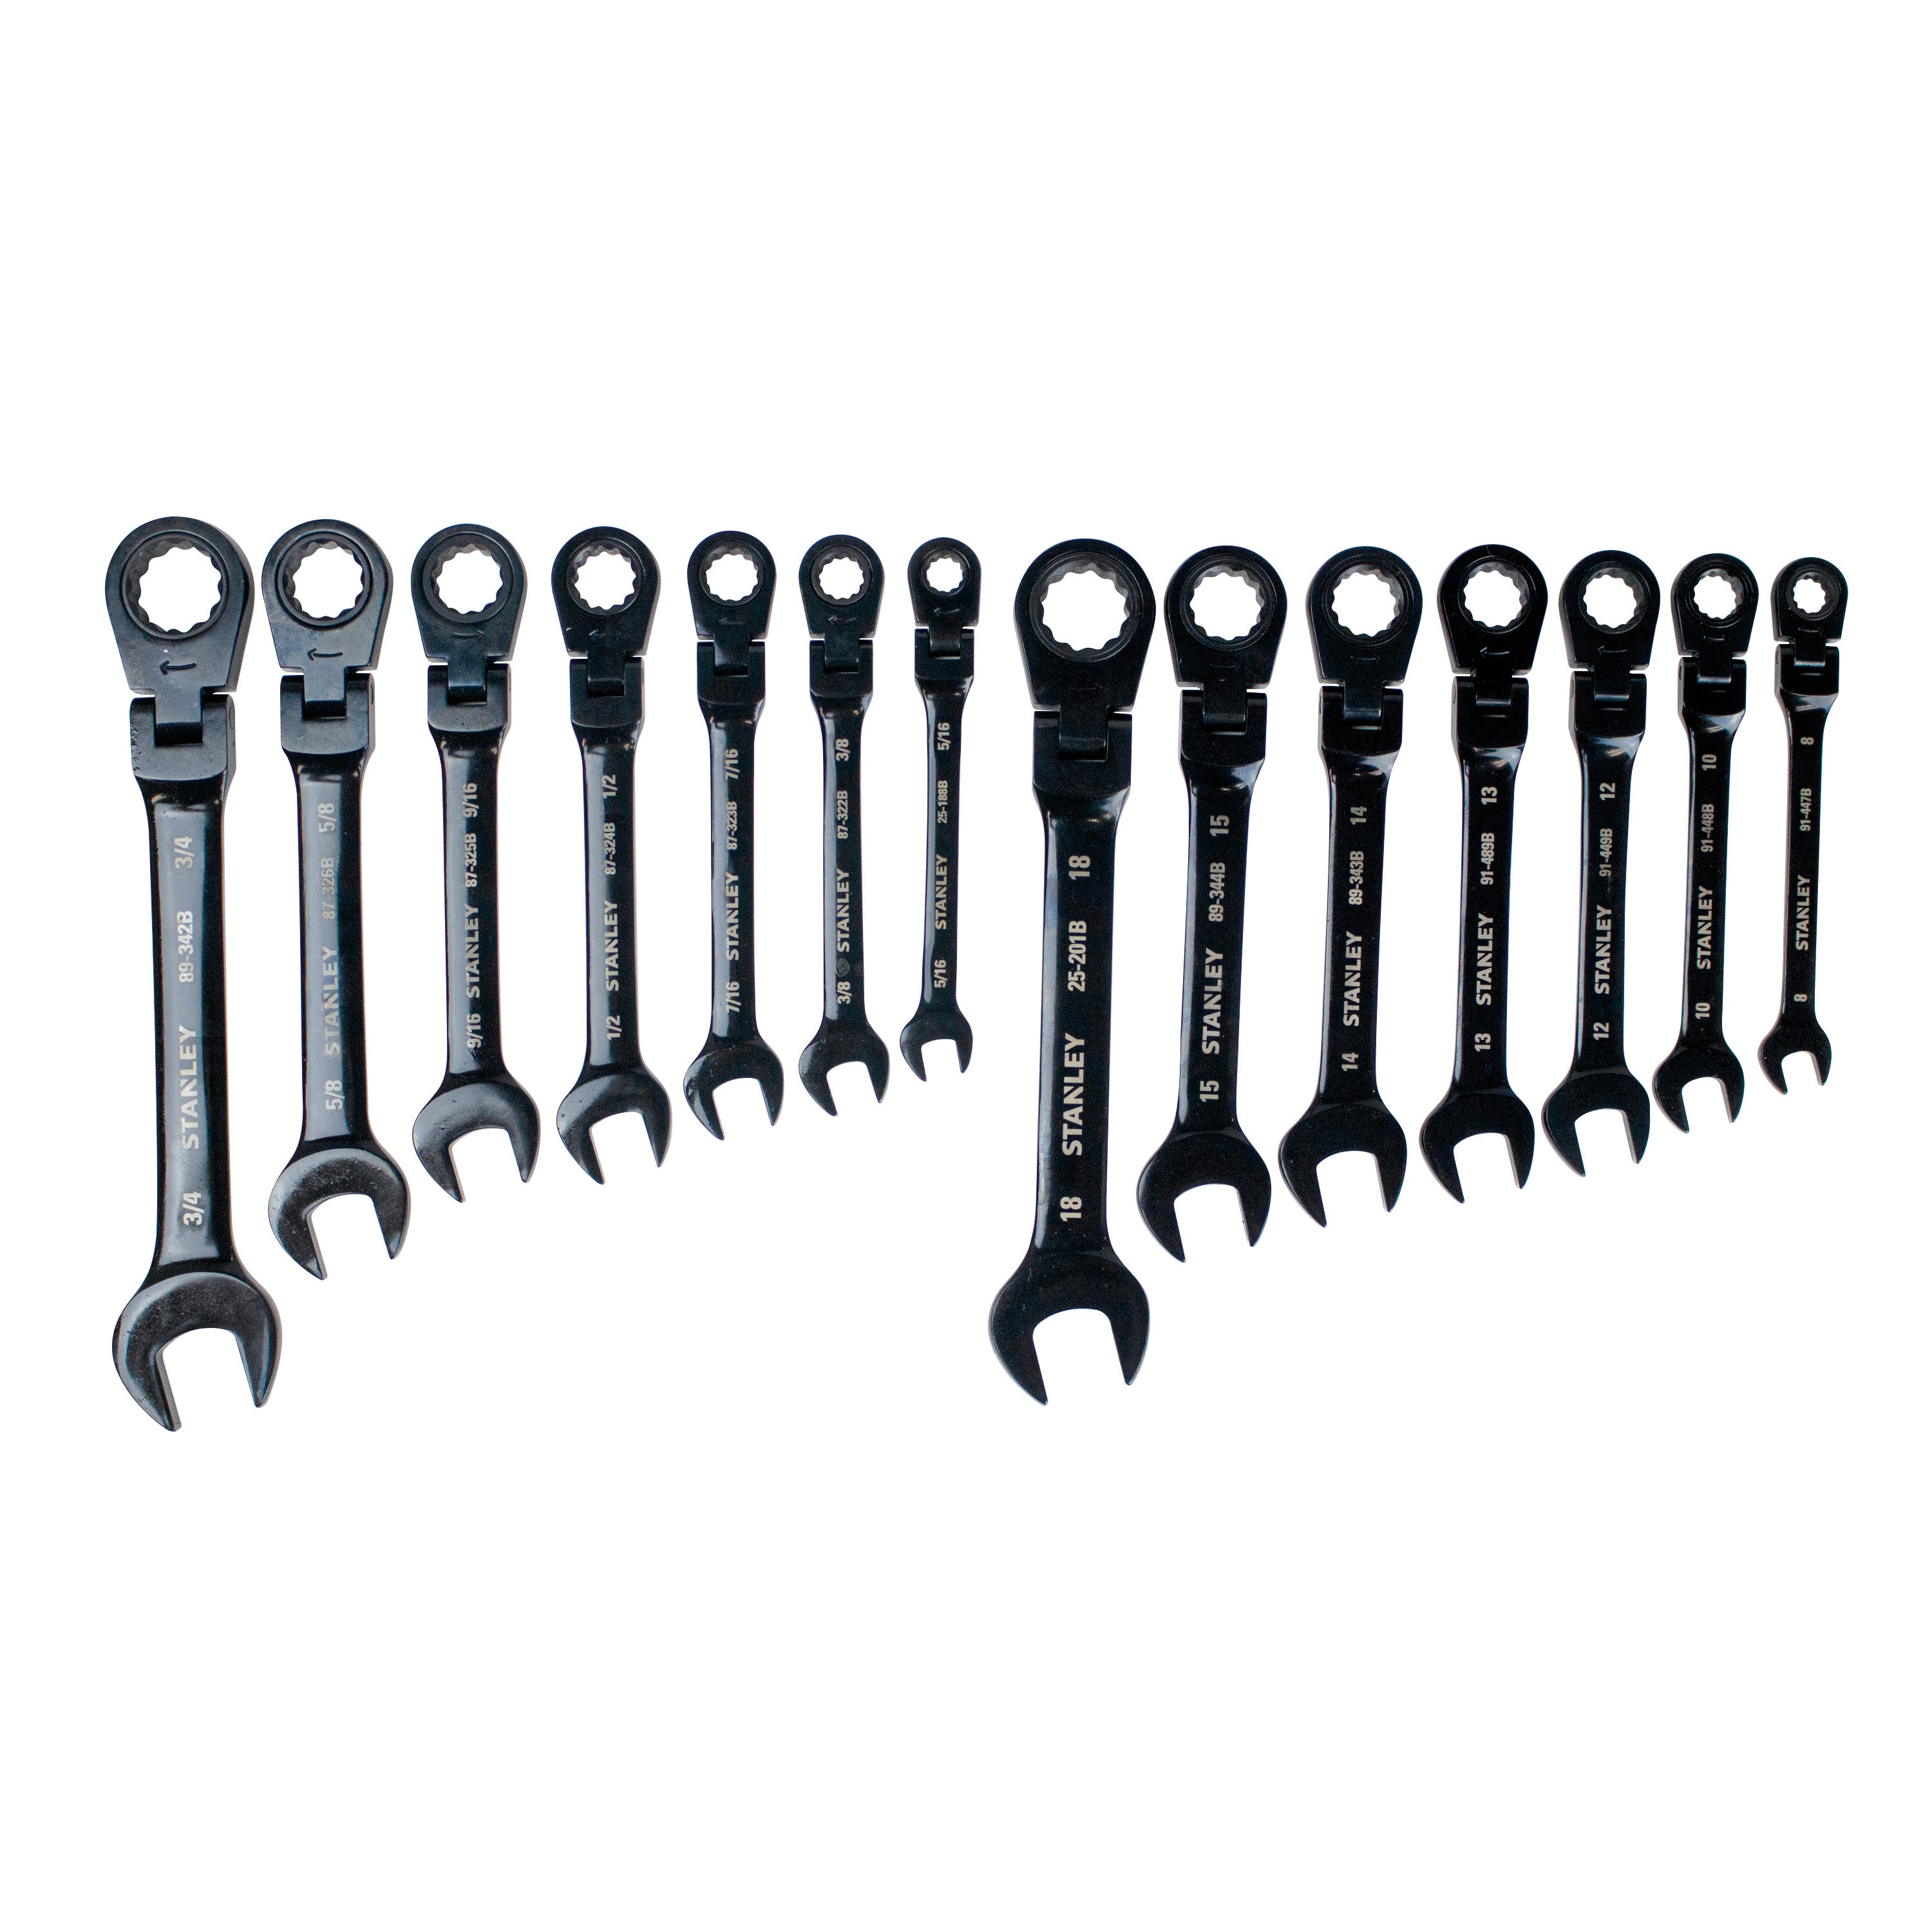 Stanley Tools - 14 PC PROFESSIONAL GRADE FLEX HEAD RATCHETING WRENCH SET - STMT17985